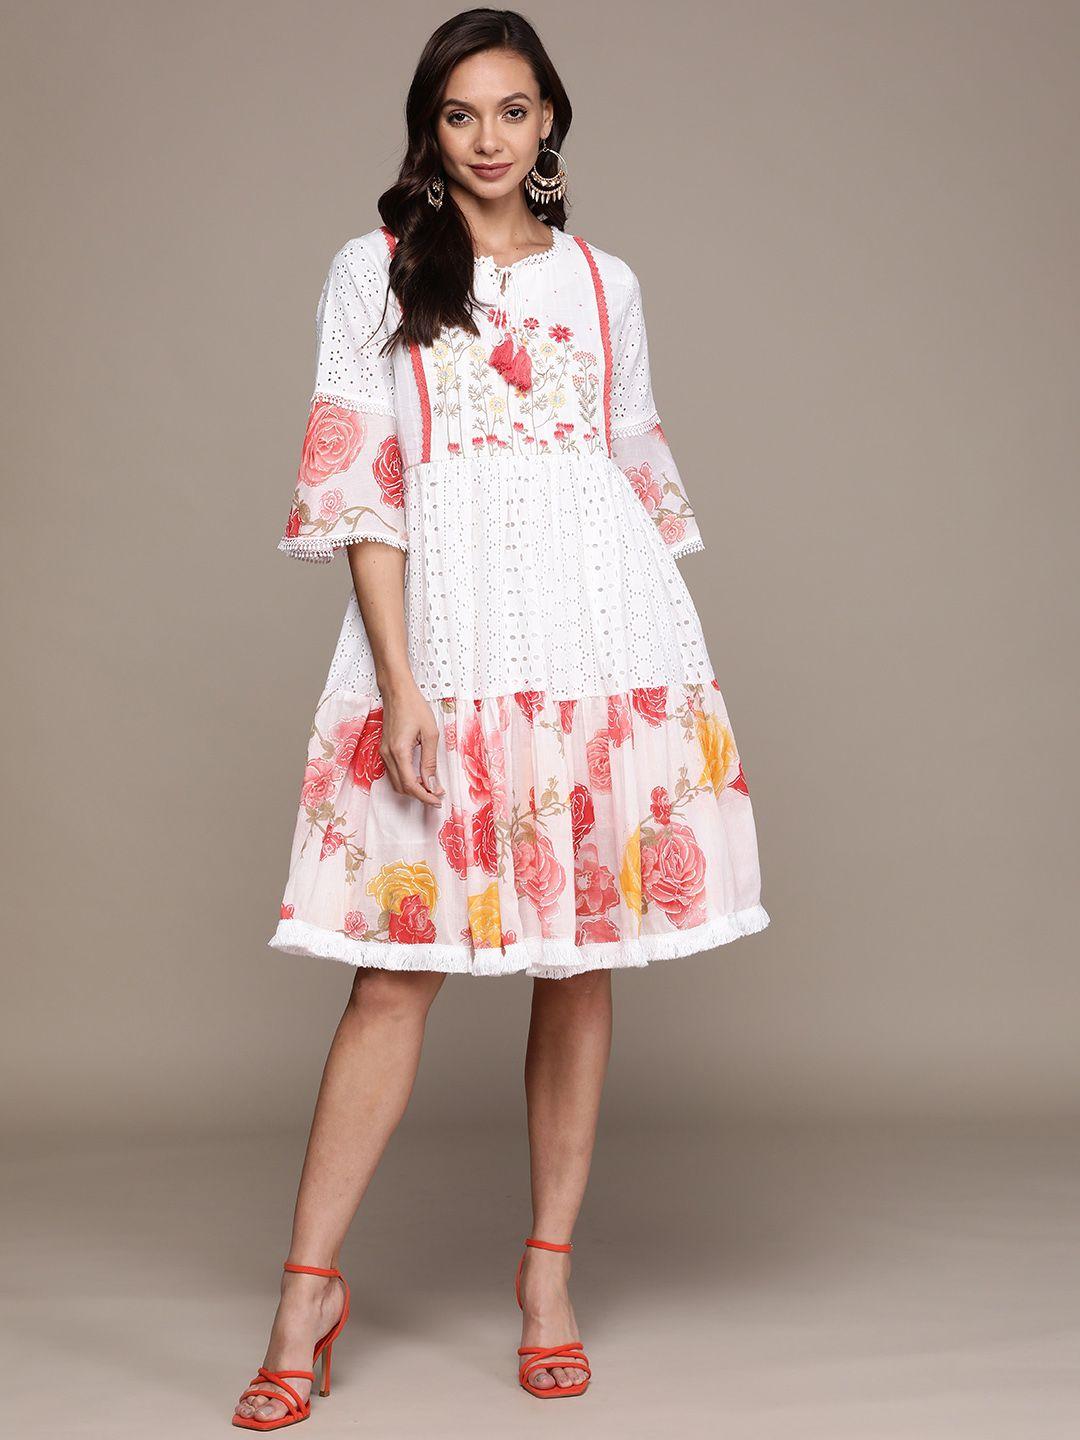 ishin white & peach-coloured floral embroidered tie-up neck a-line dress